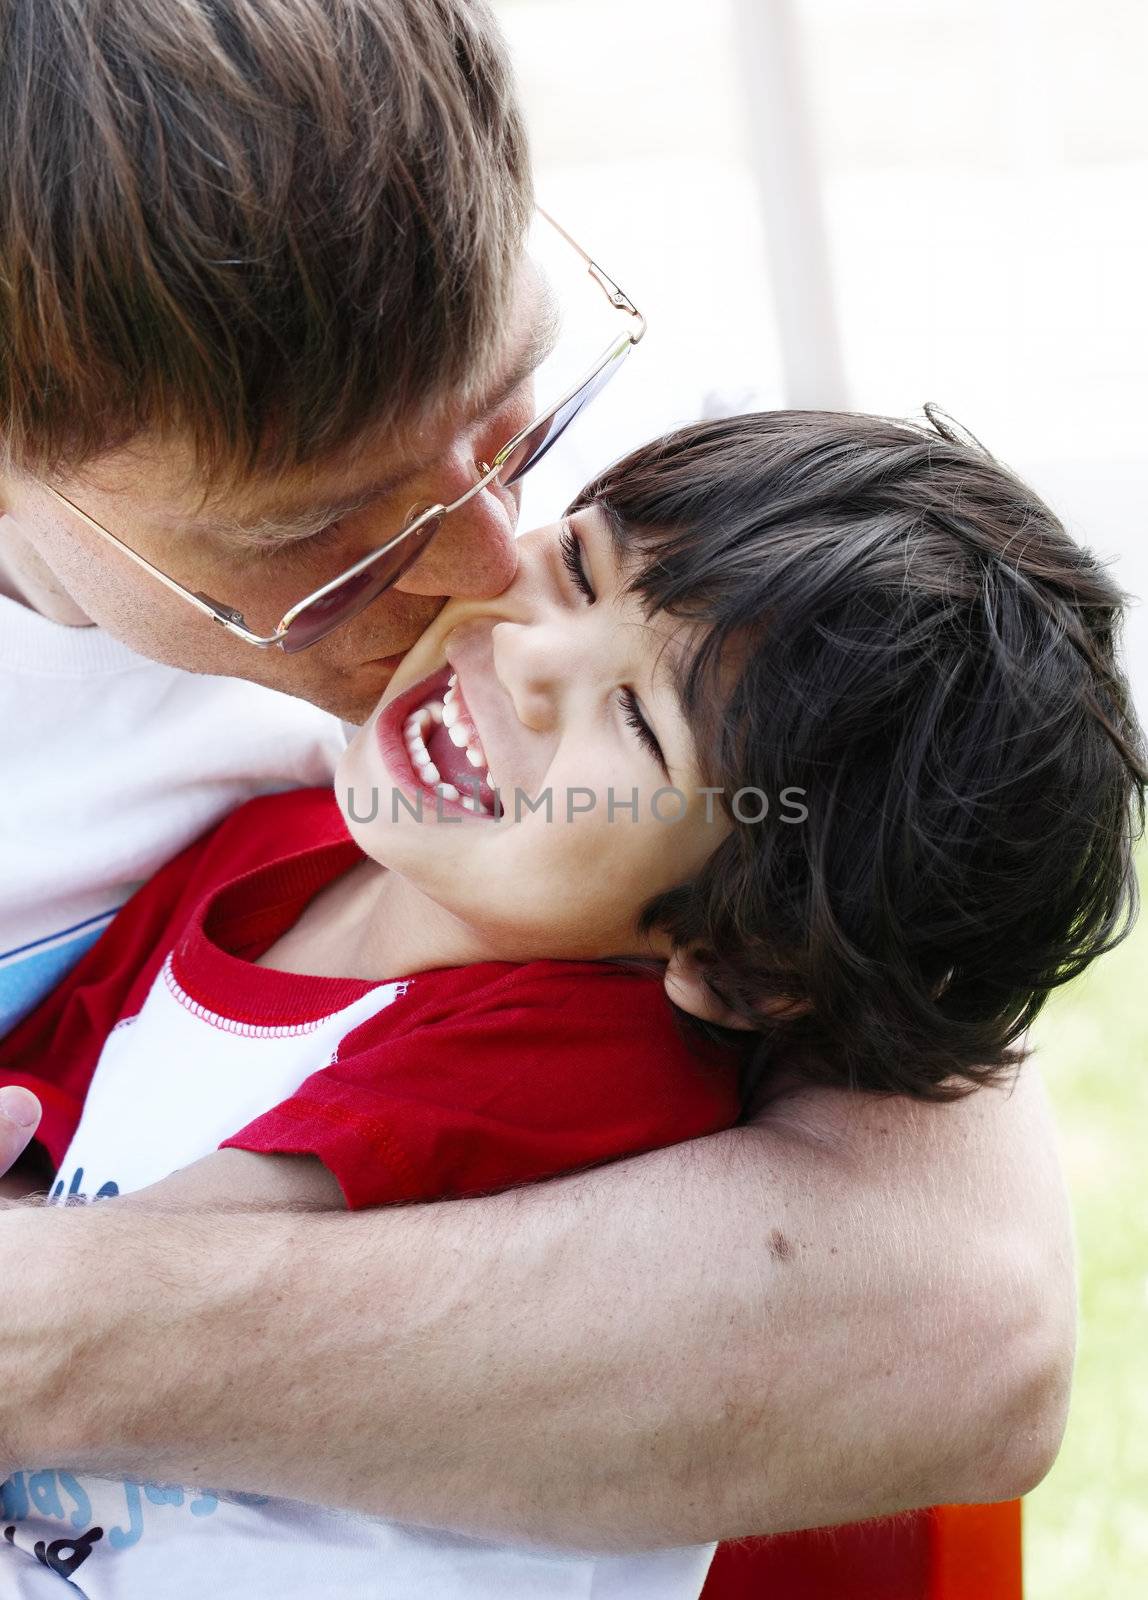 Father kissing his son, three years old by jarenwicklund